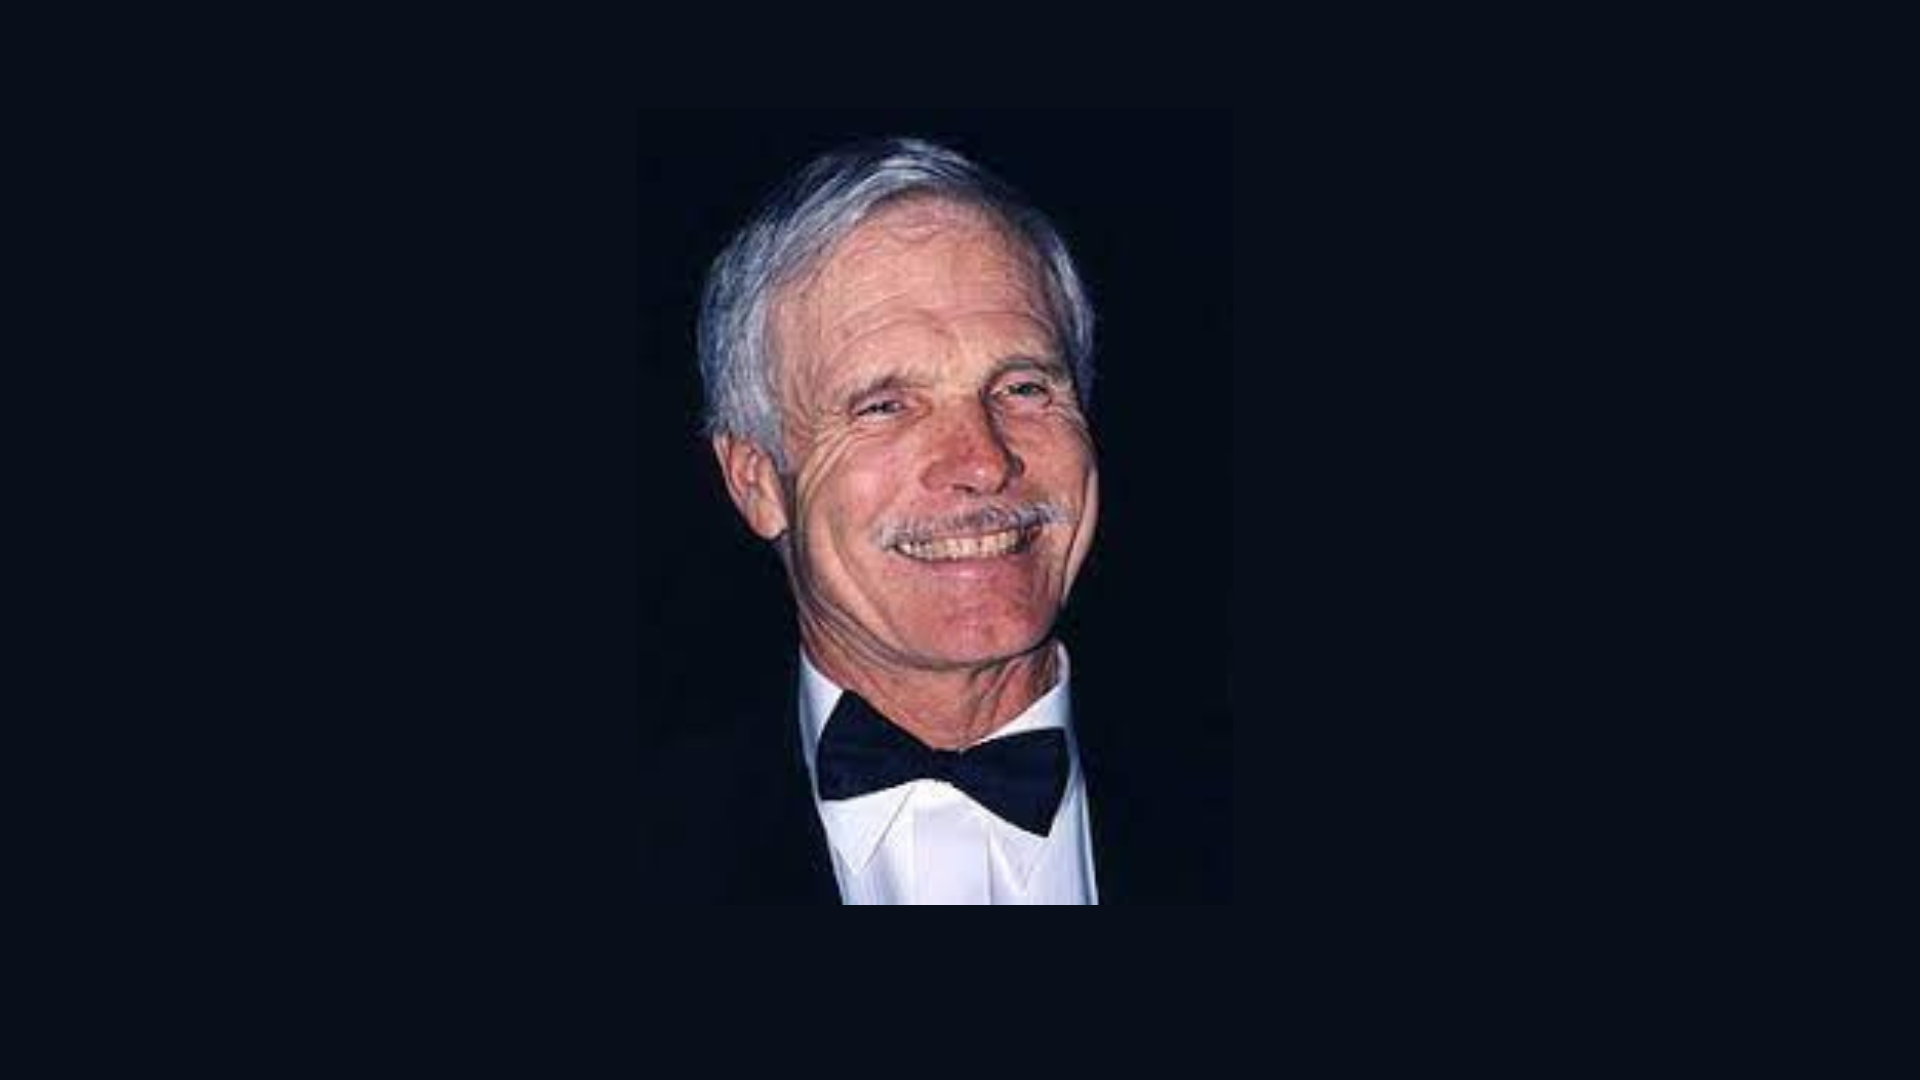 Beyond CNN: Ted Turner's impact on media and philanthropy